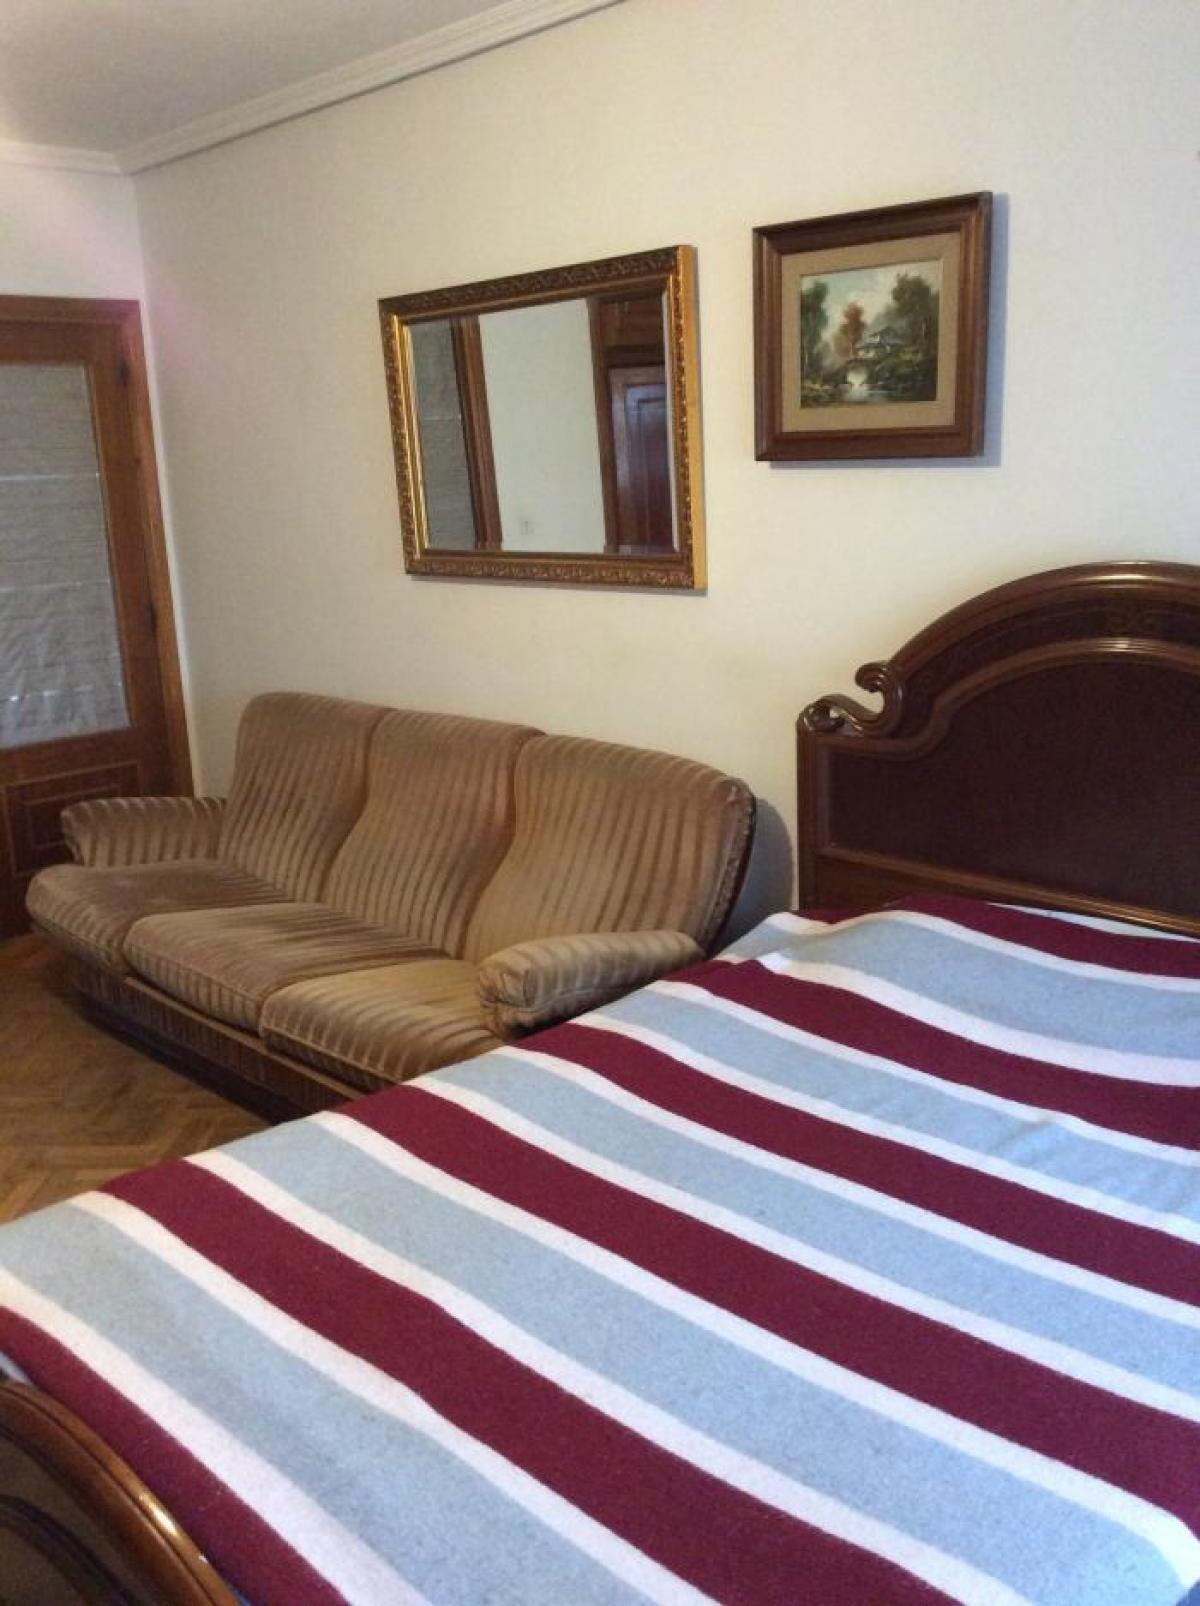 Picture of Apartment For Rent in Oviedo, Asturias, Spain